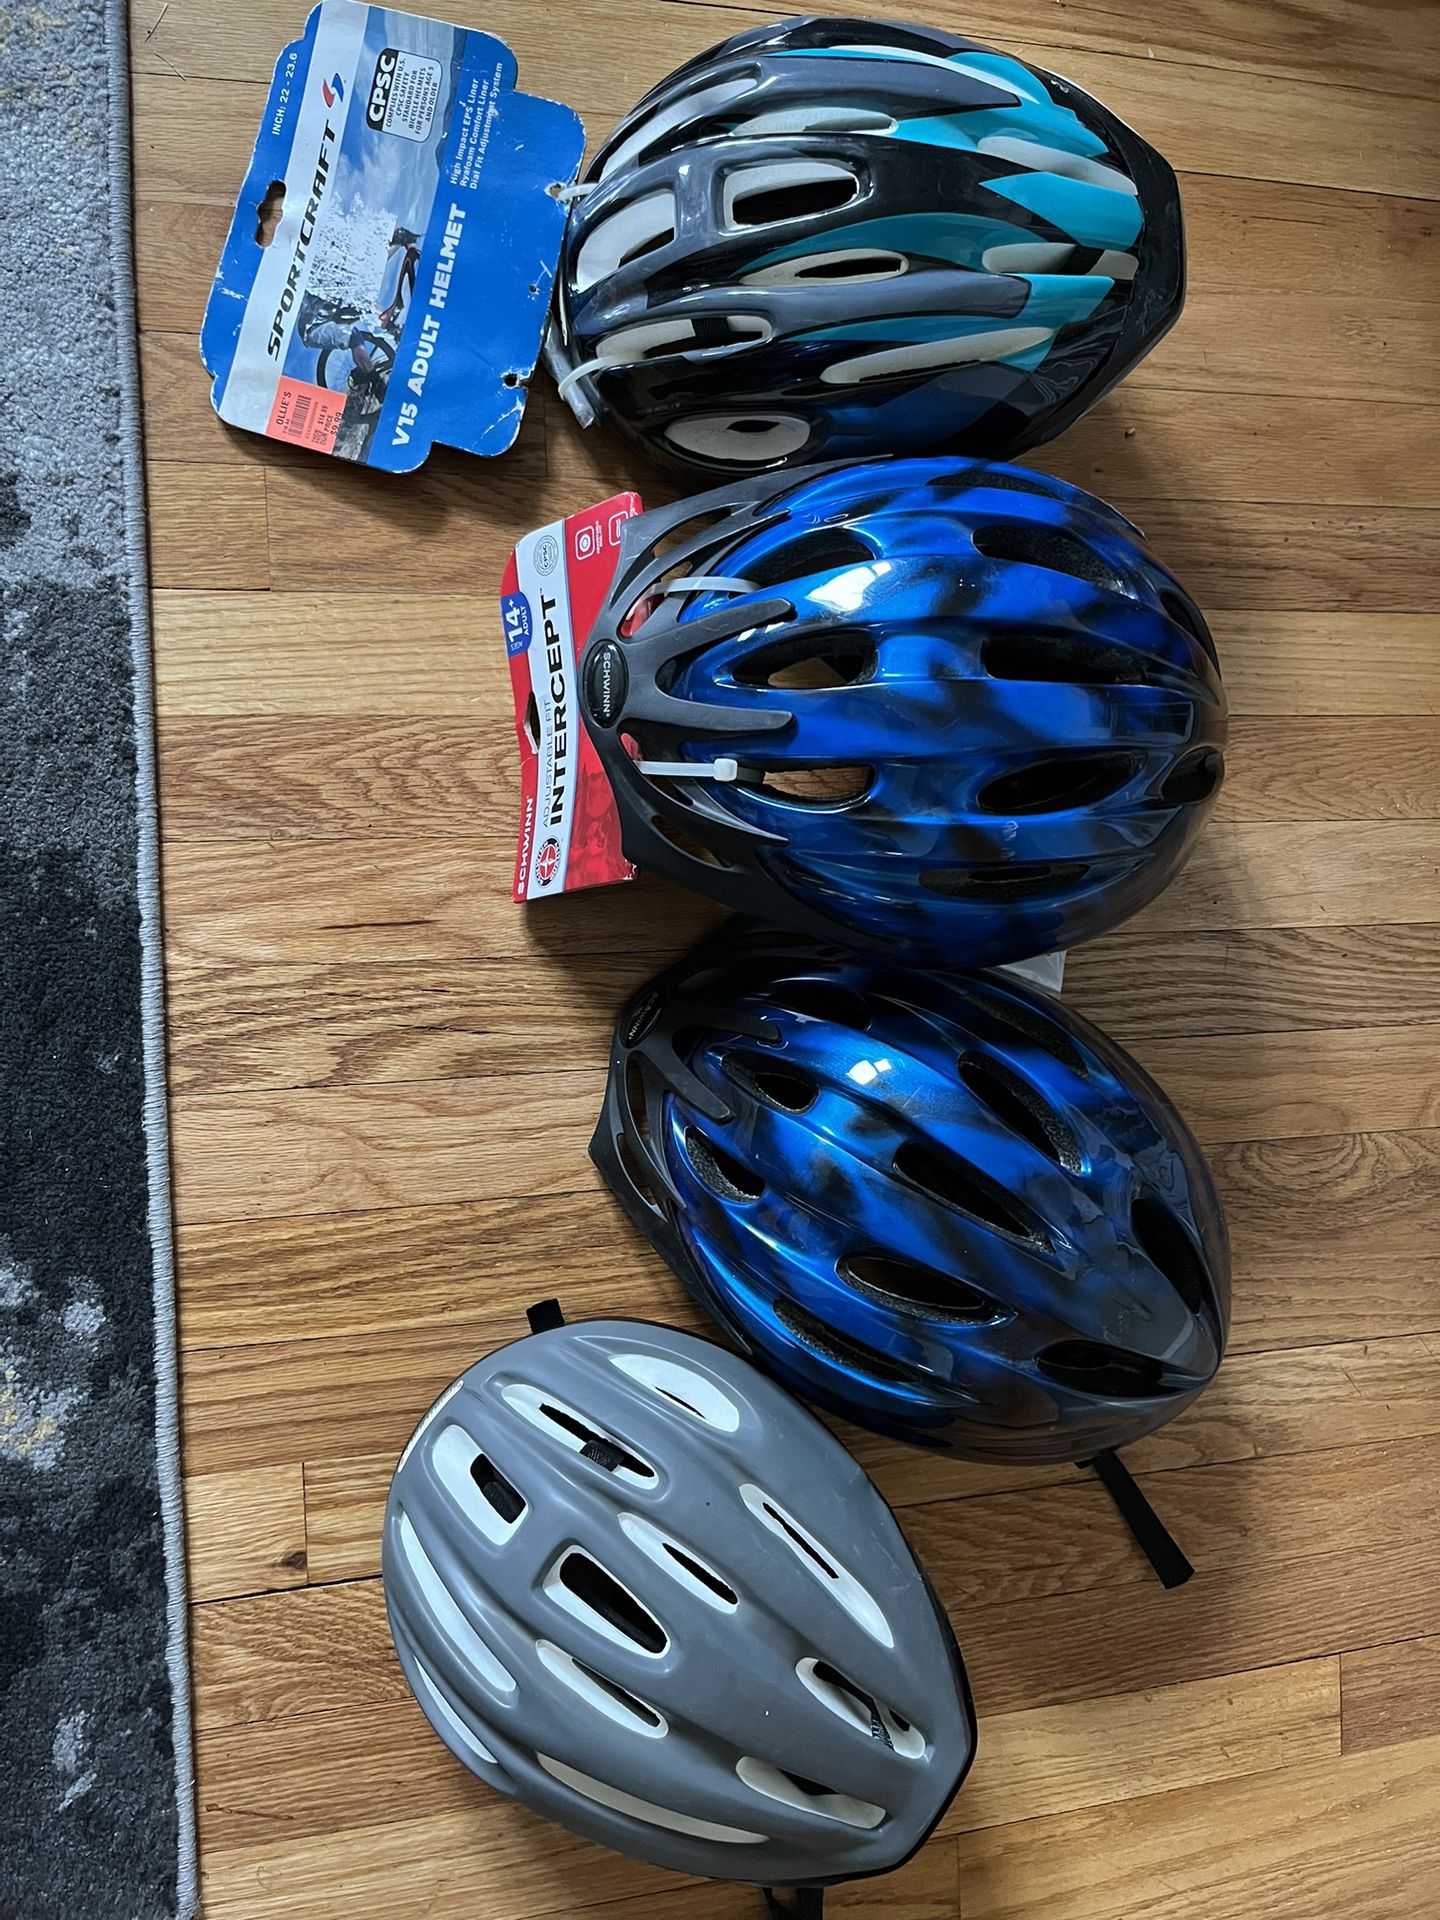 Bicycle helmets; Adult Sizes  